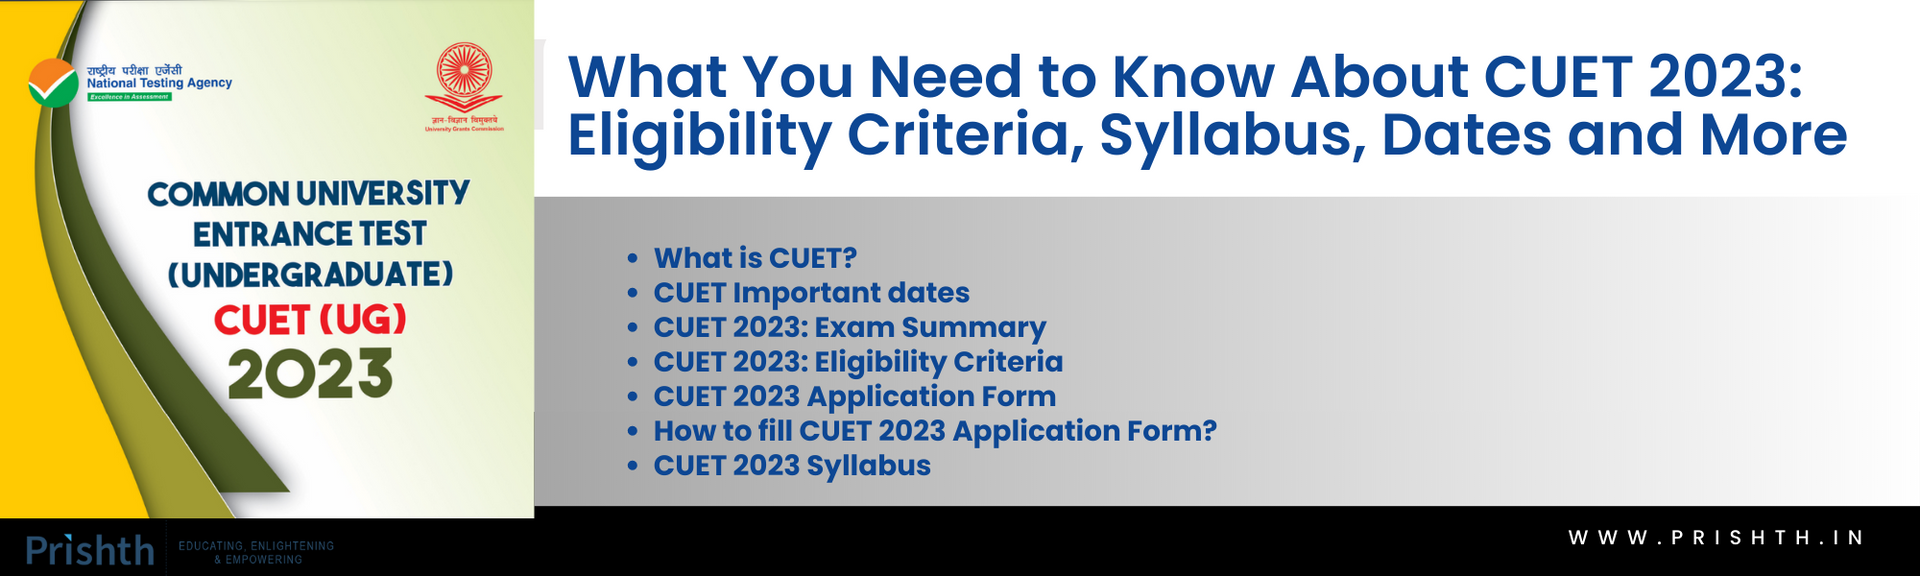 What You Need to Know About CUET 2023: Eligibility Criteria, Syllabus, Dates and More